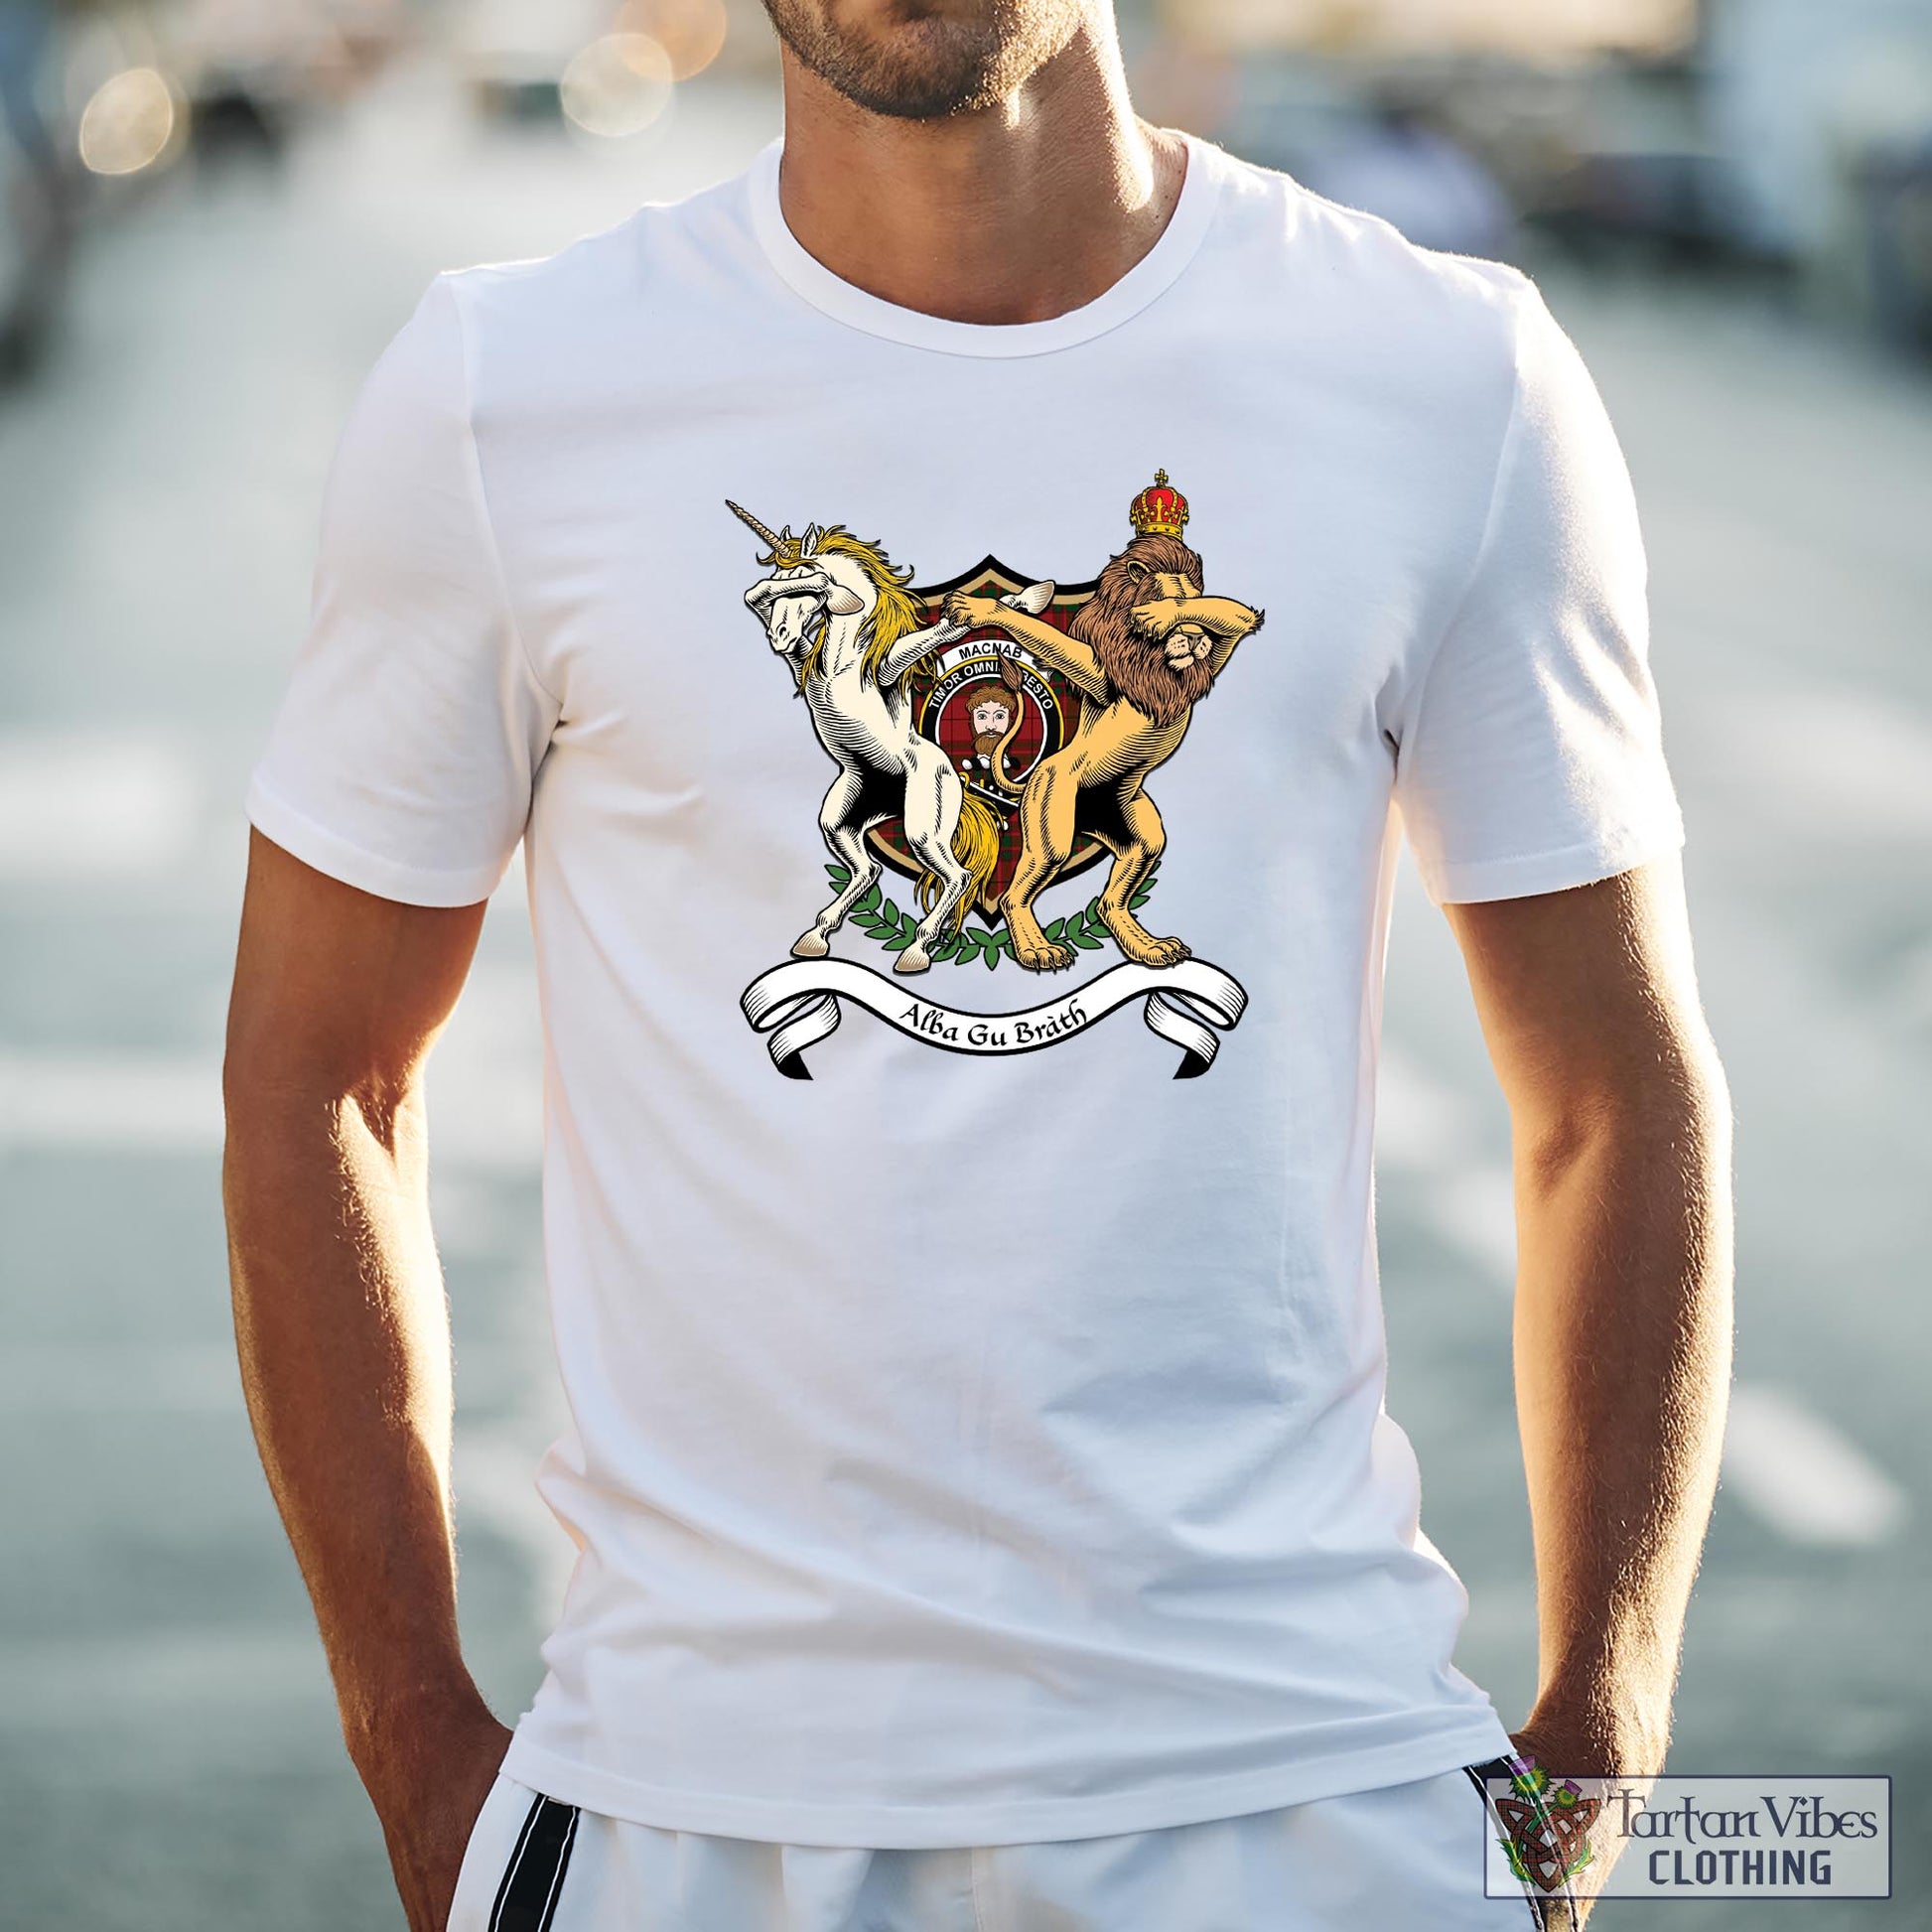 Tartan Vibes Clothing MacNab Family Crest Cotton Men's T-Shirt with Scotland Royal Coat Of Arm Funny Style